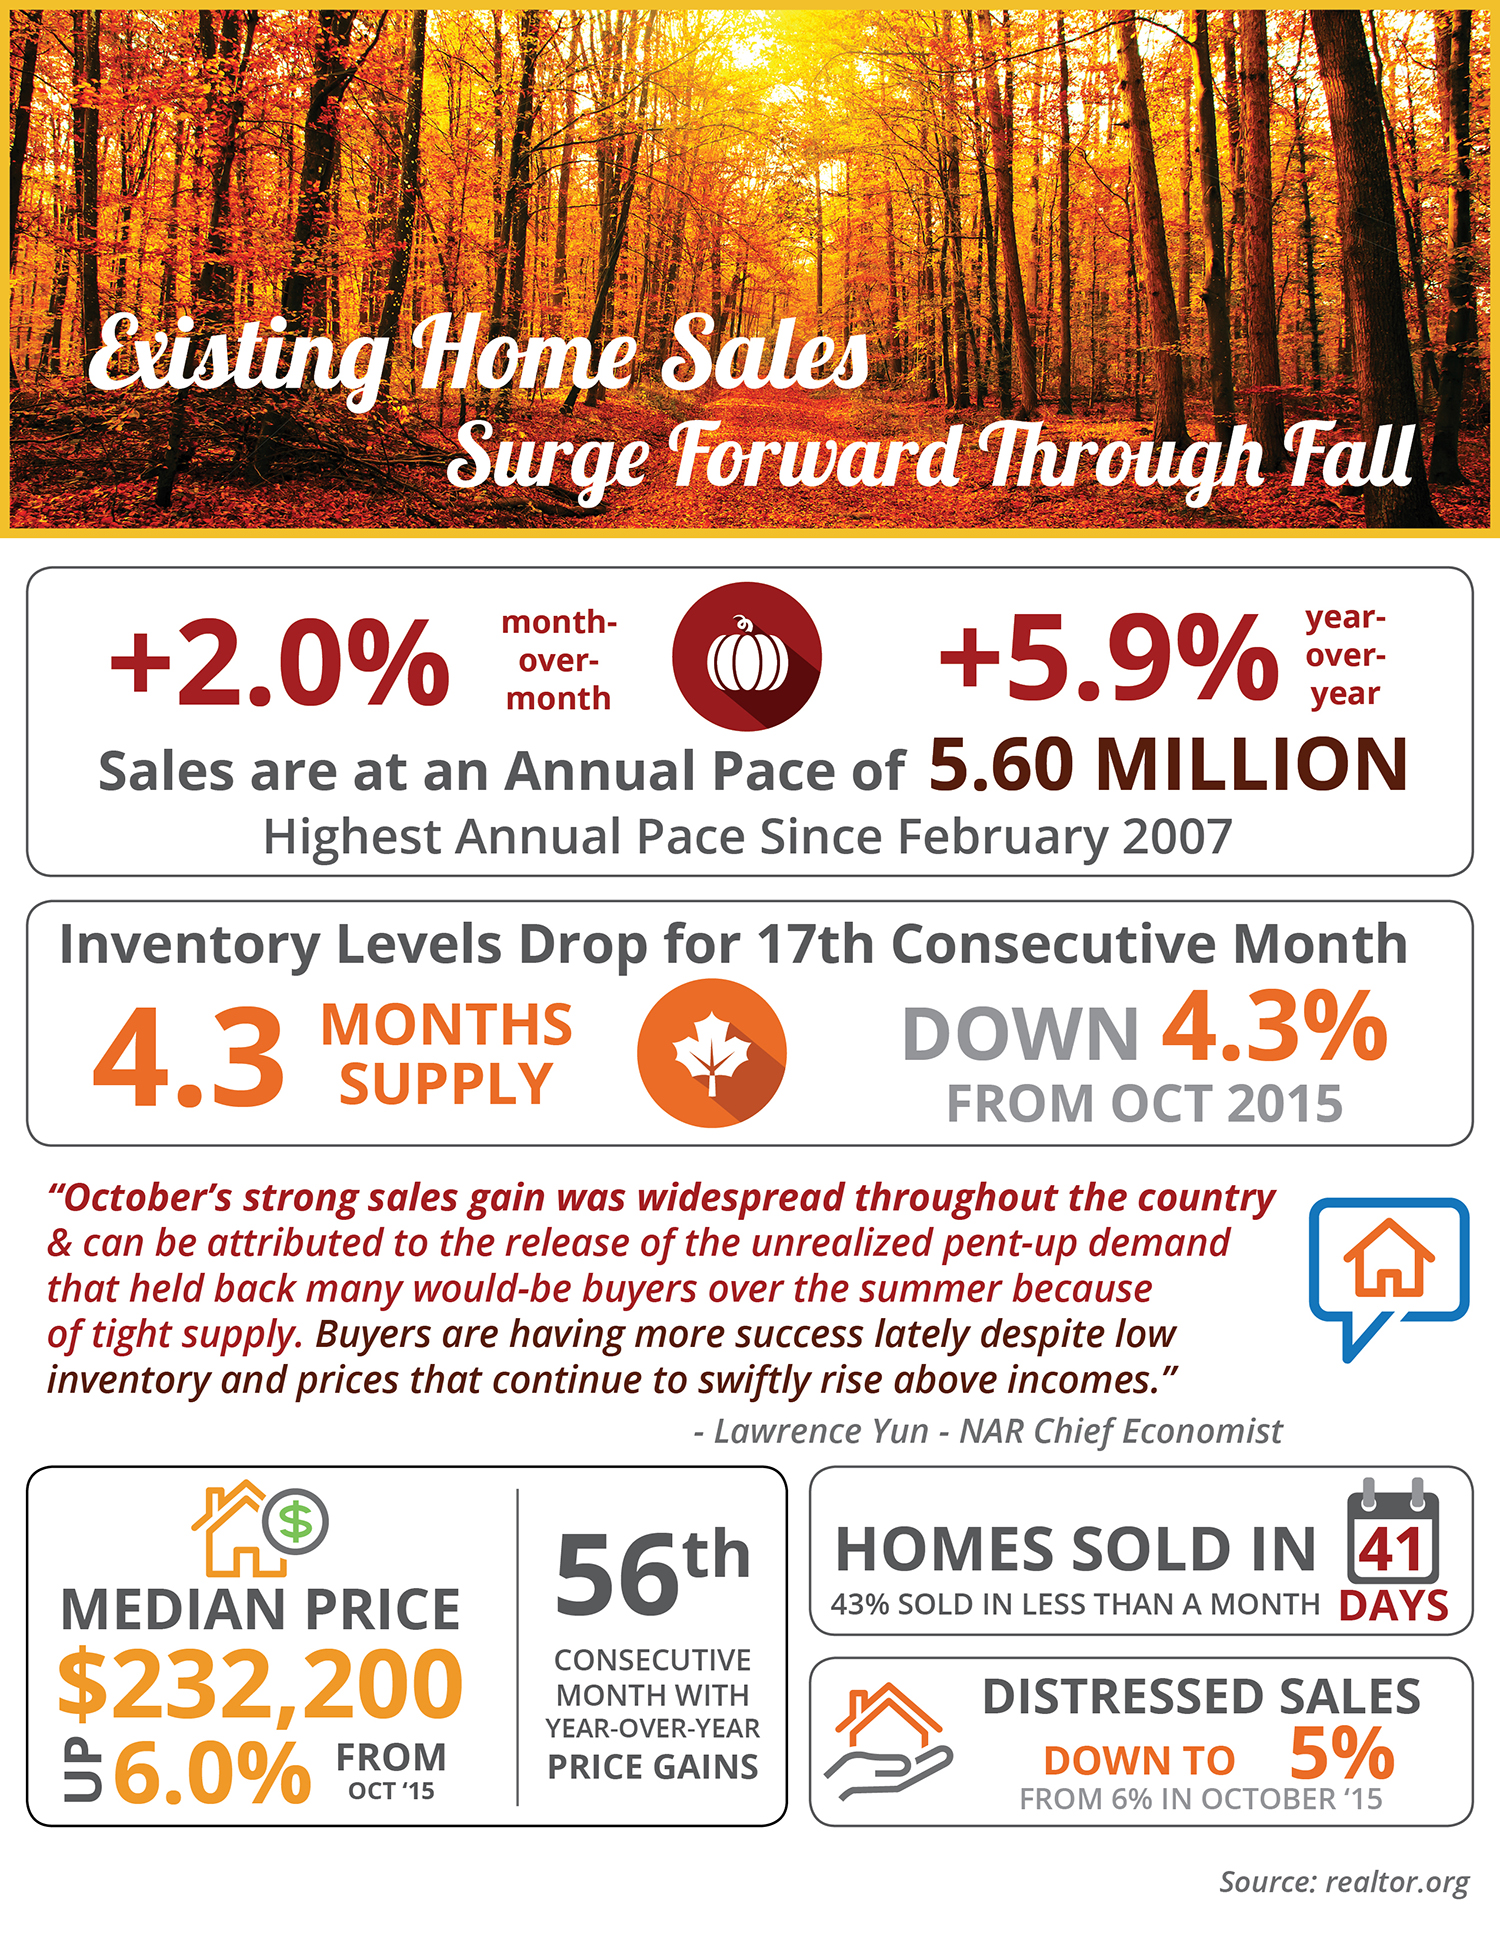 Existing Home Sales Surge Forward Through Fall [INFOGRAPHIC] | Simplifying The Market